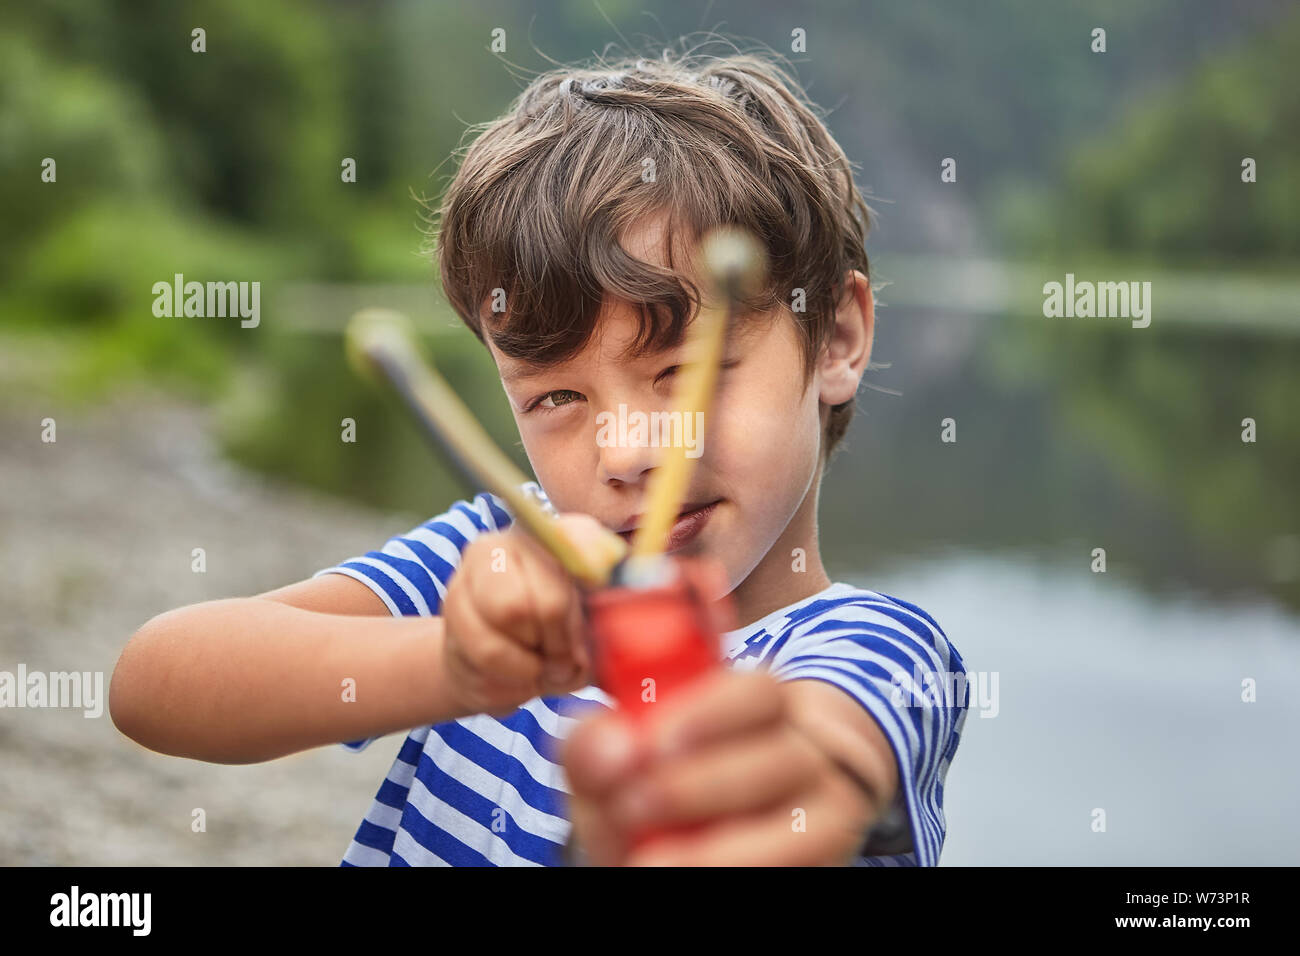 White bully boy about 8 years old is playing with slingshot in park and preparing for shot. Stock Photo